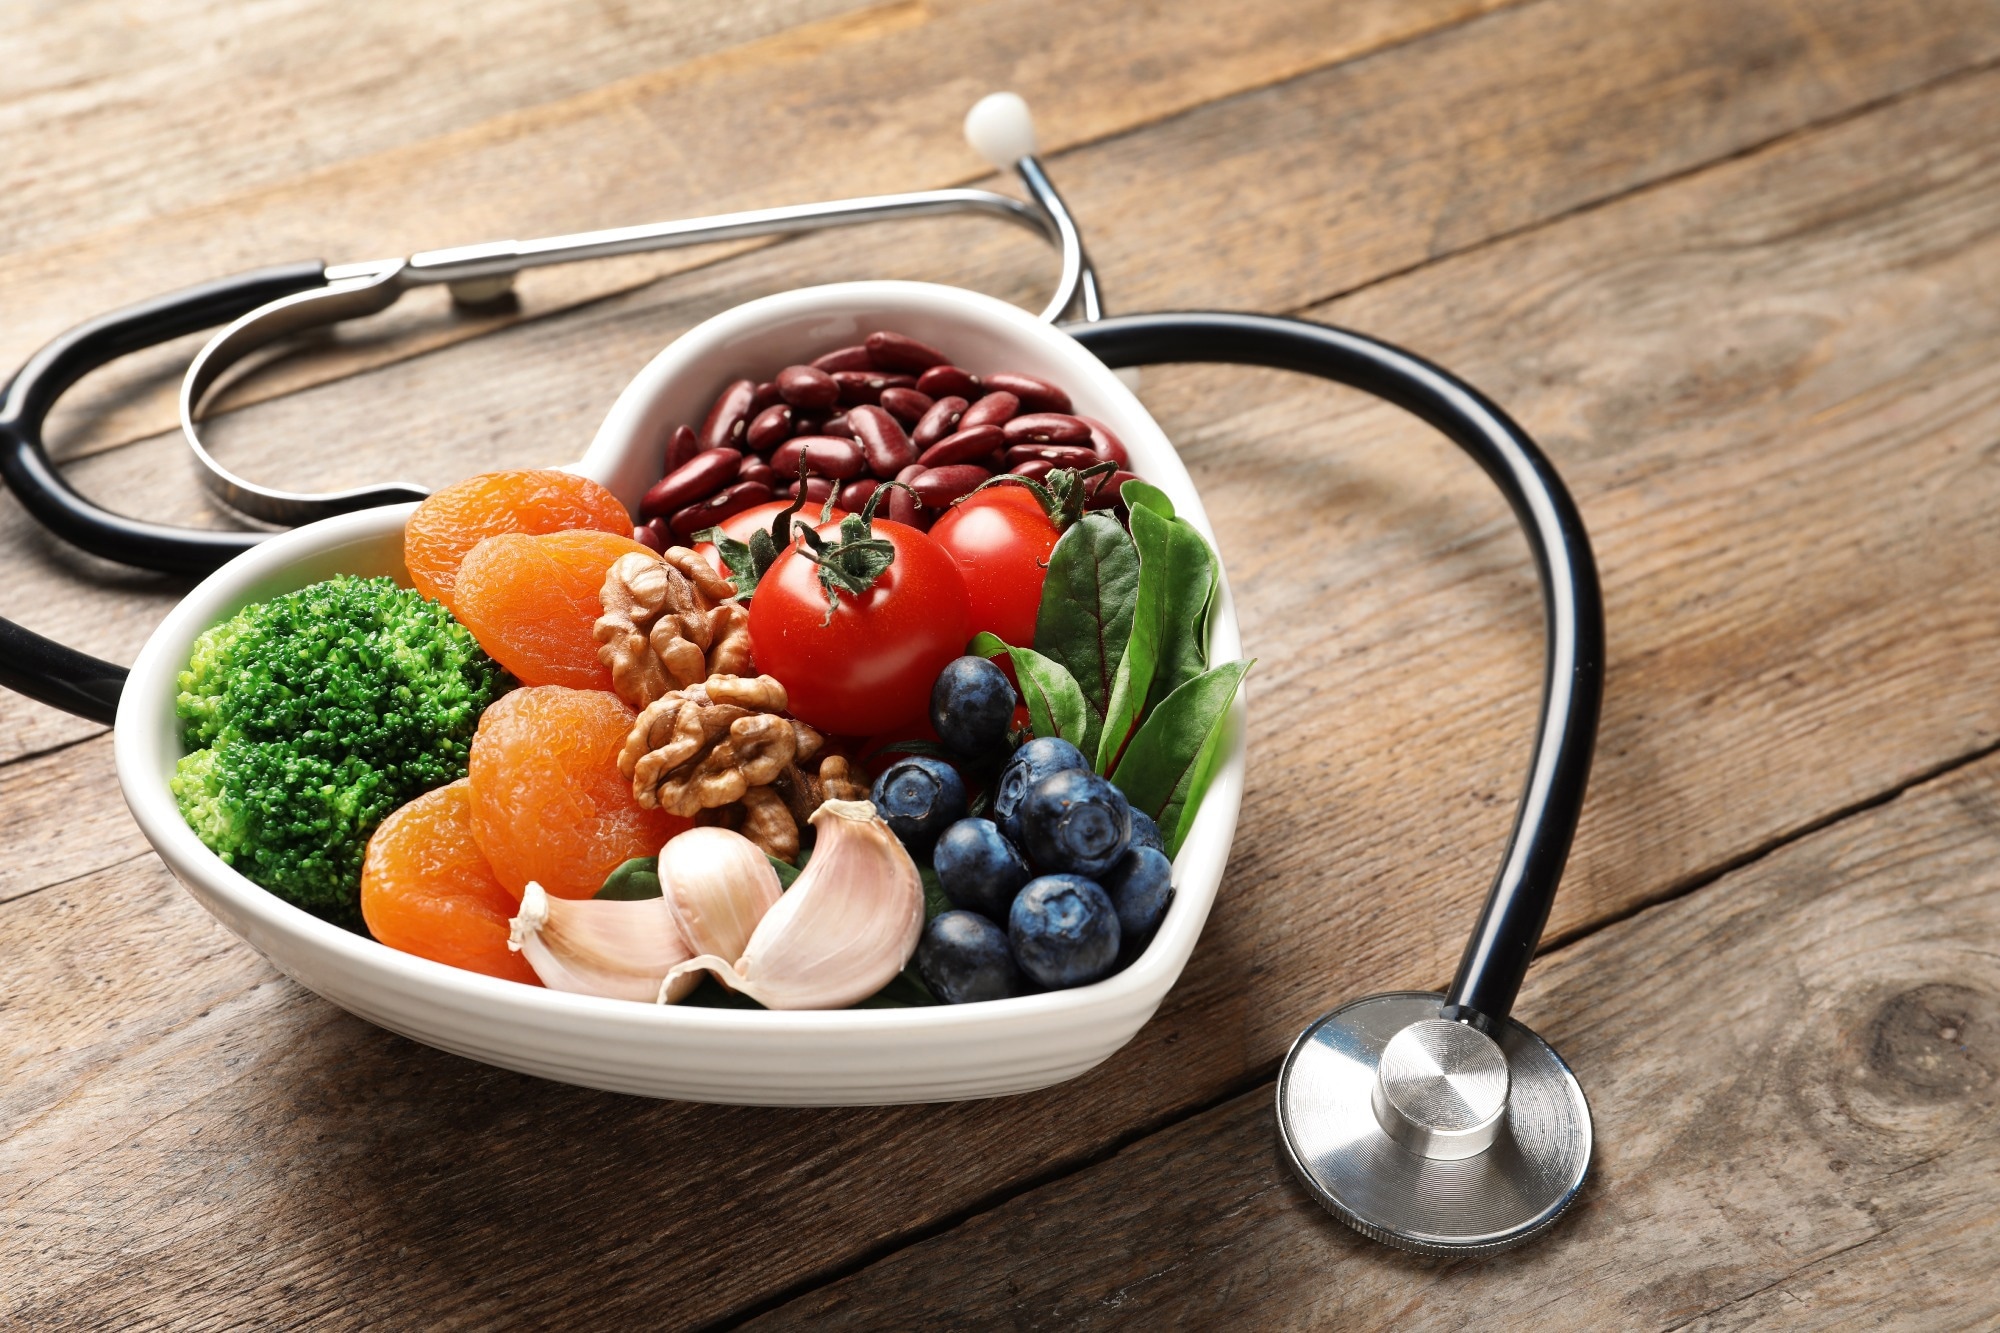 Study: A Heart-Healthy Diet for Cardiovascular Disease Prevention: Where Are We Now? Image Credit: New Africa / Shutterstock.com